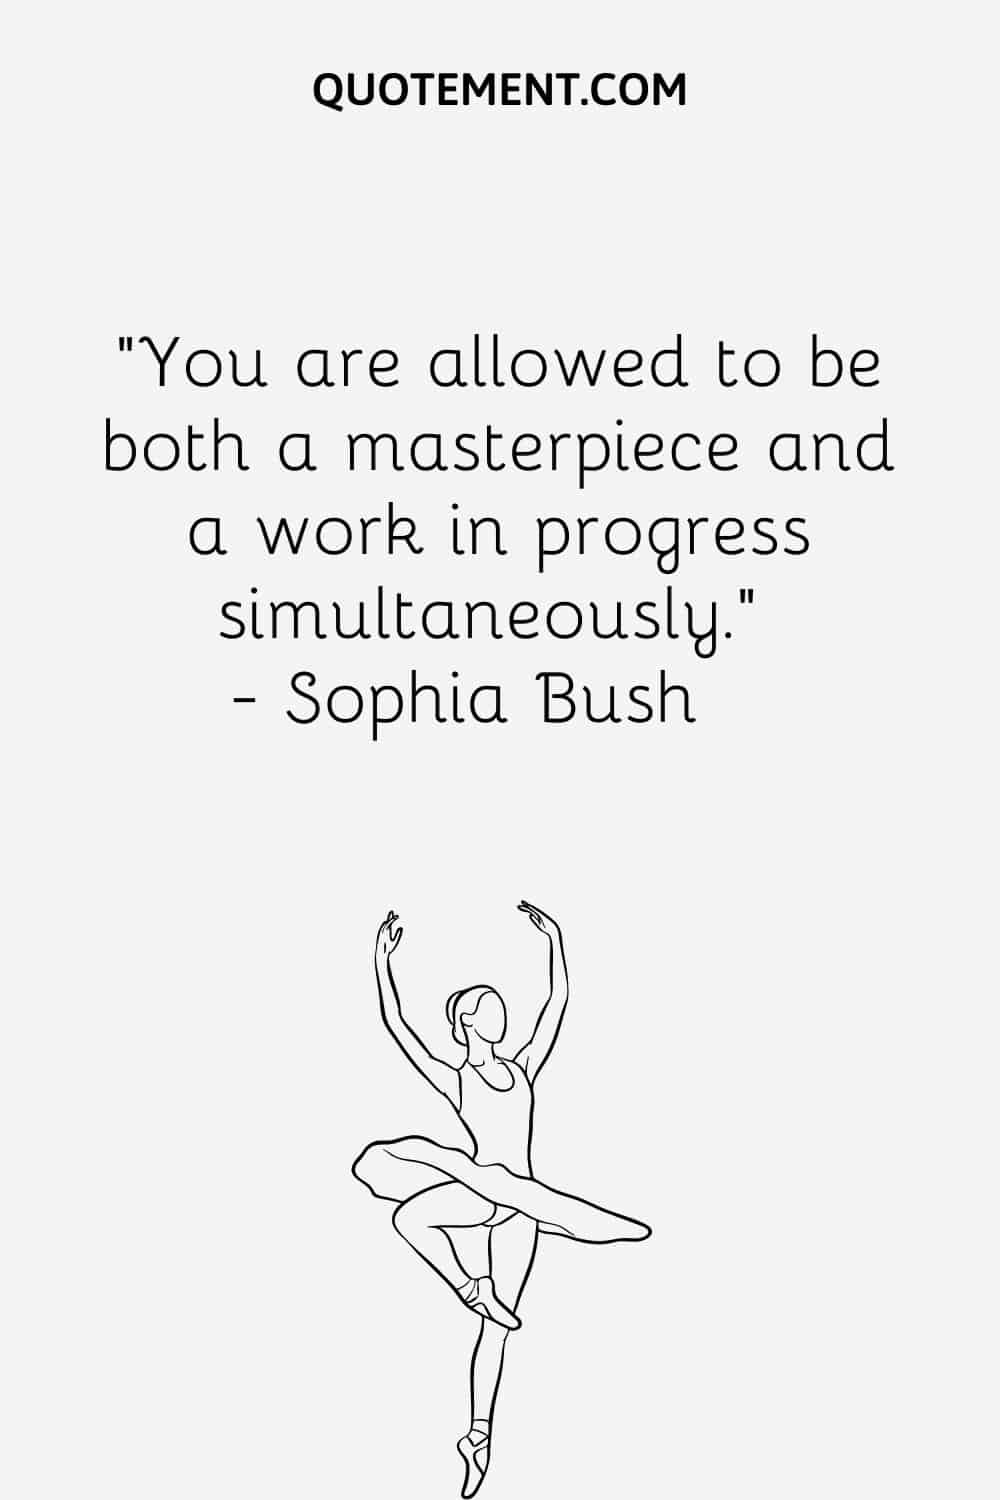 You are allowed to be both a masterpiece and a work in progress simultaneously